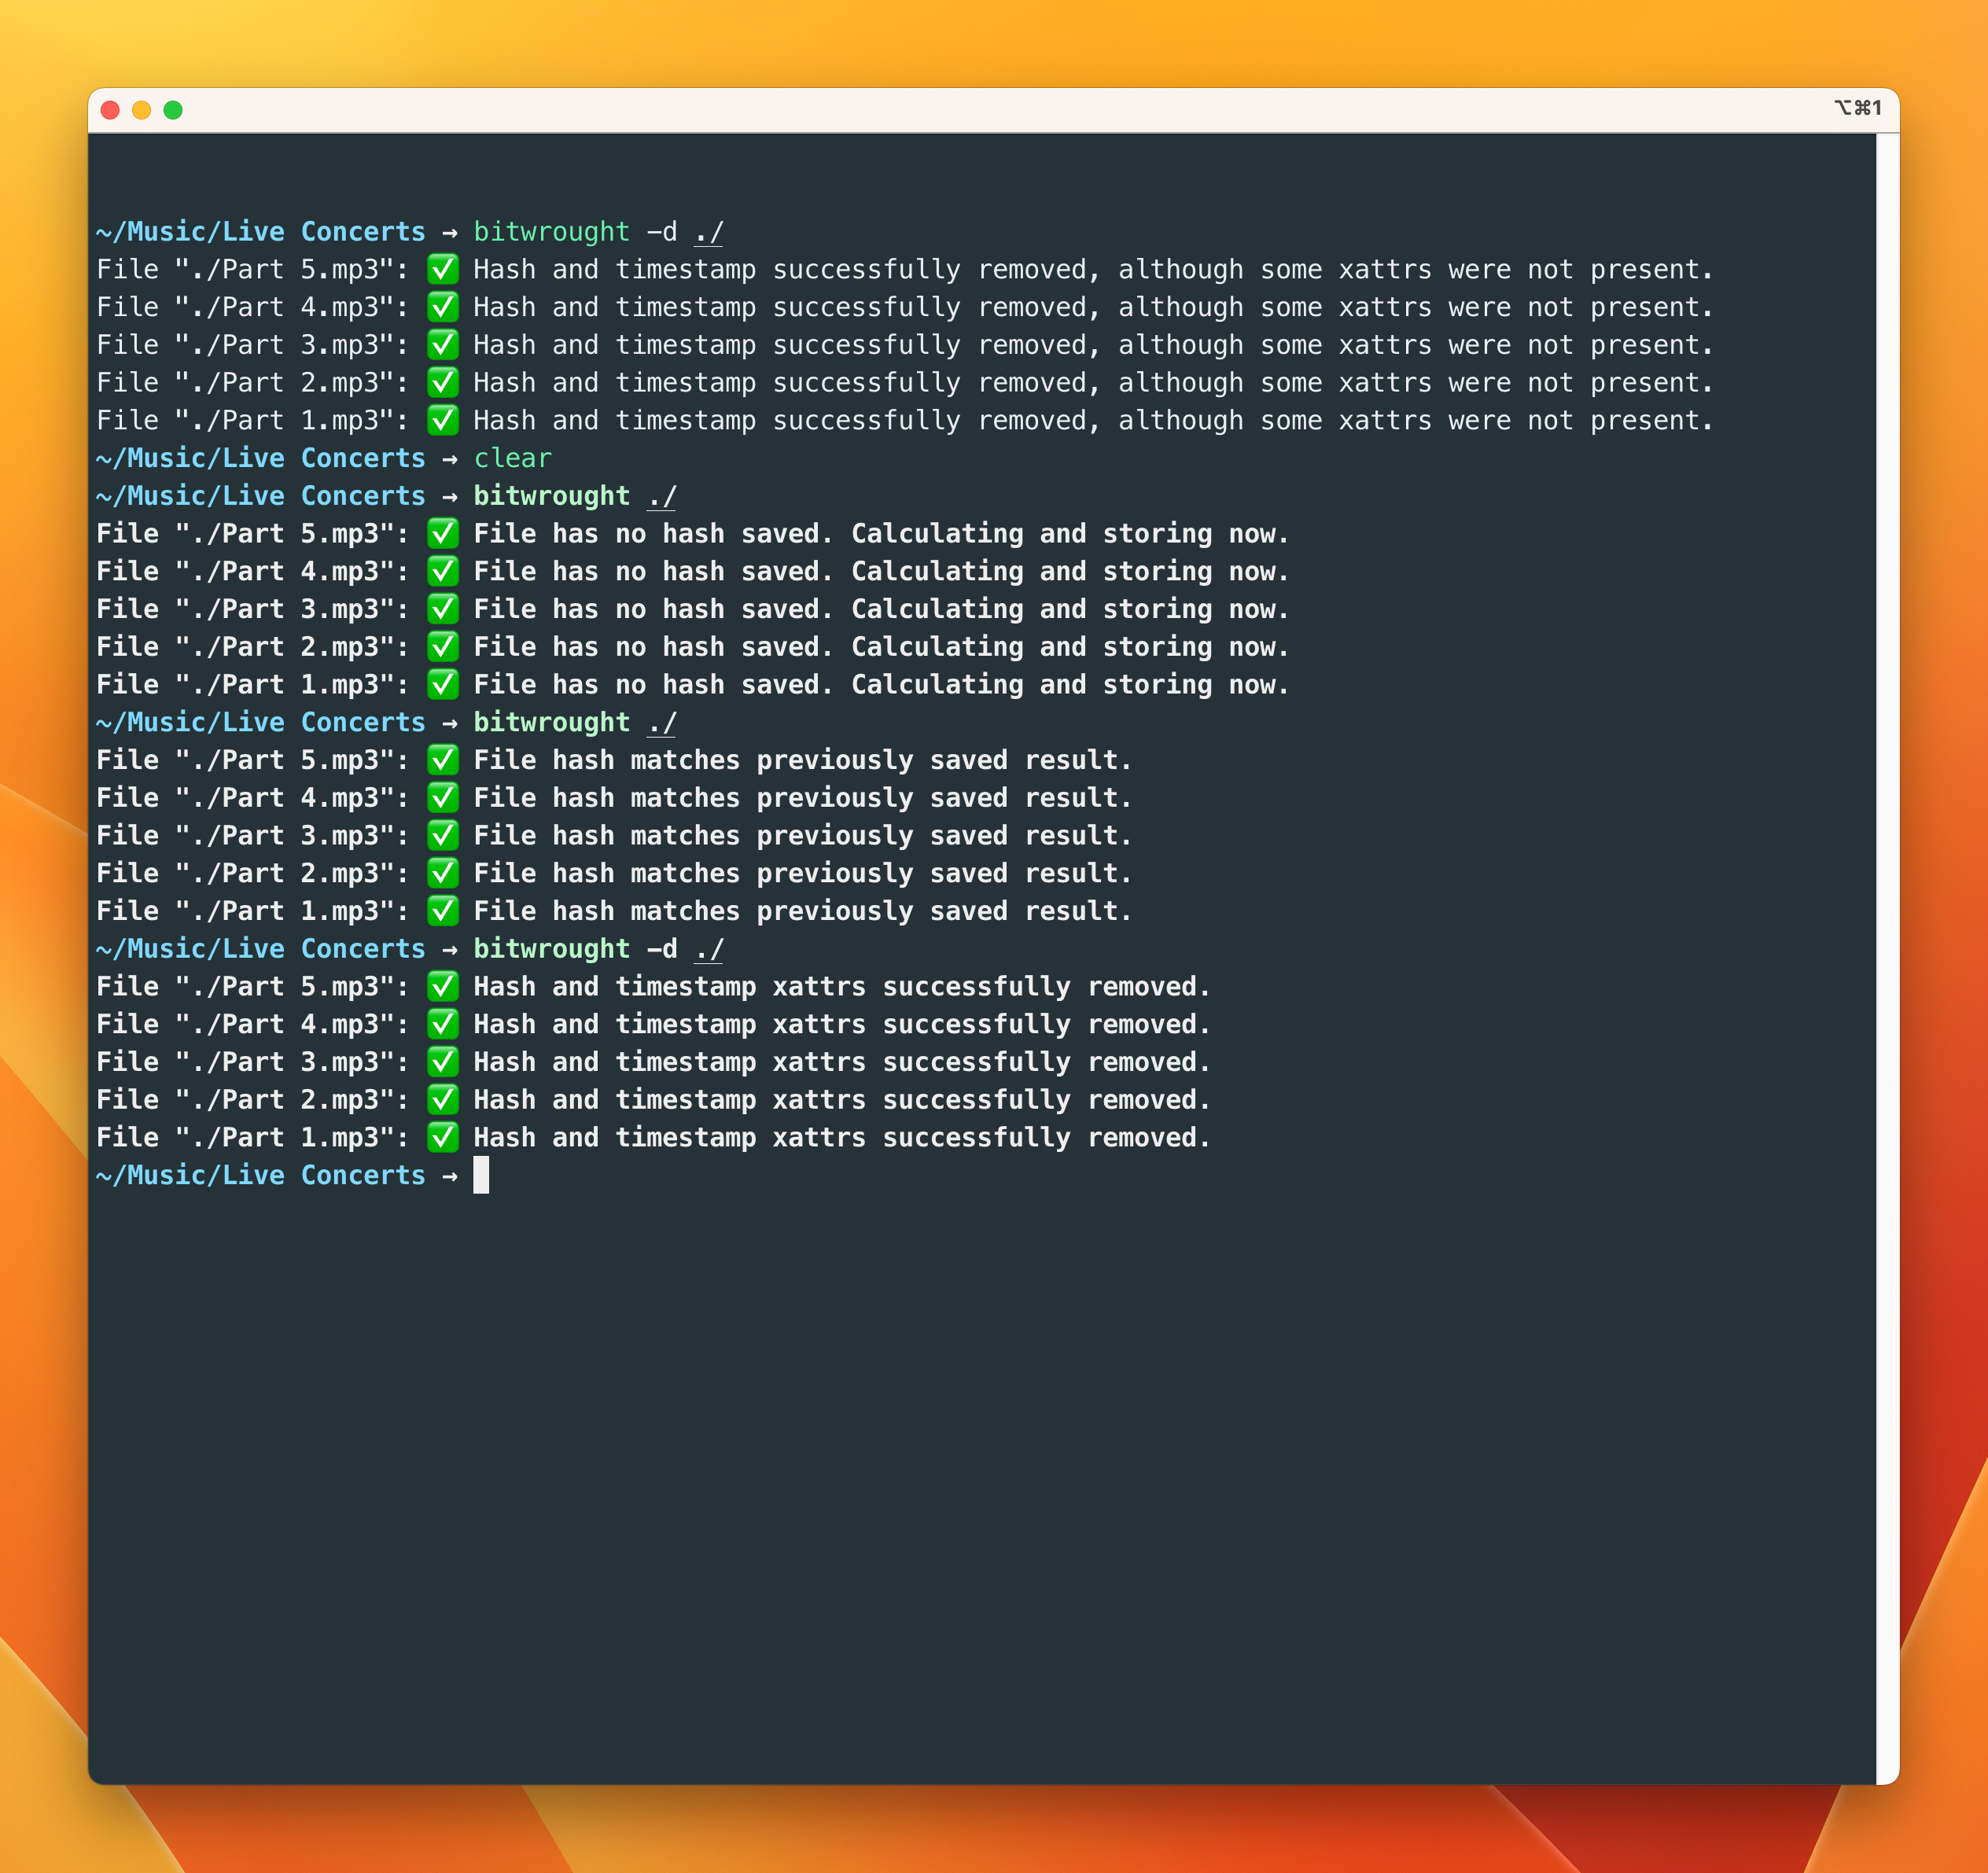 image of bitwrought cli app in a terminal